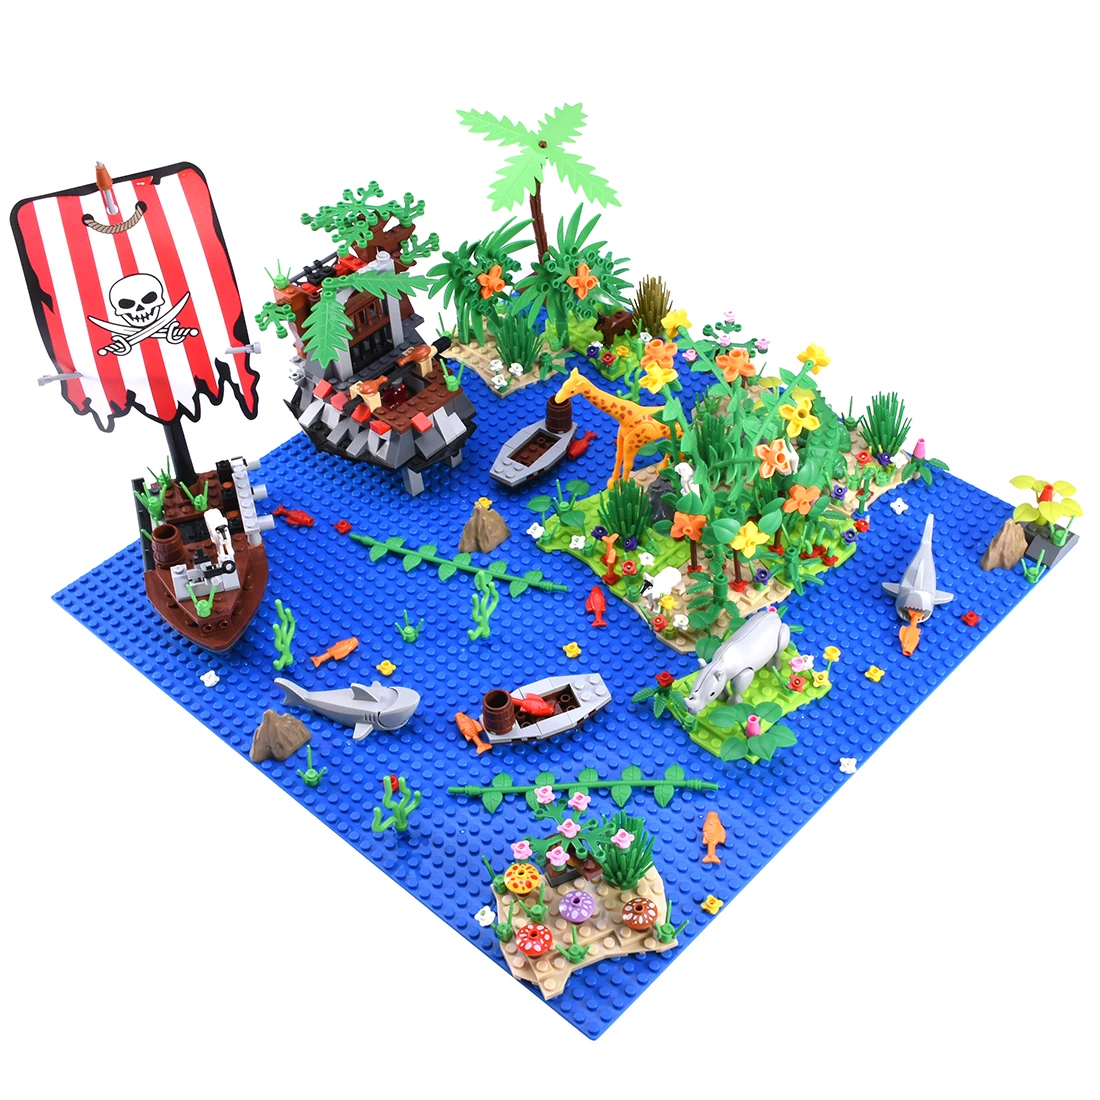 

Tropical Rainforest Pirate Bay Island Scene DIY Small Particle Building Blocks Kit Stem Toy With 50x50 Baseplate For Kids Gift